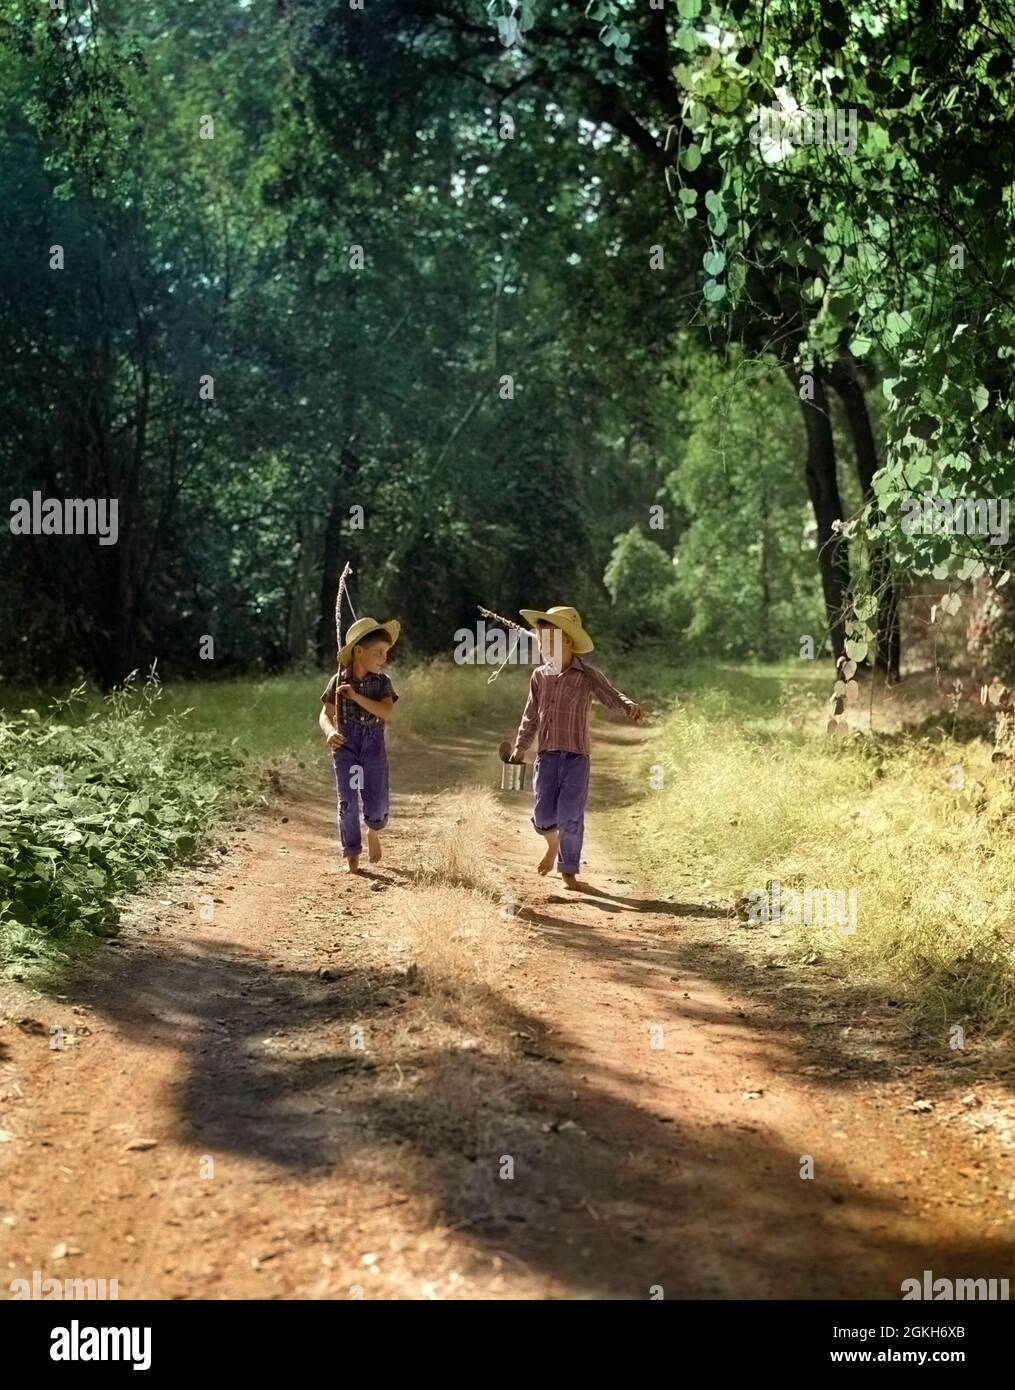 1940s 1950s TWO BOYS IN DUNGAREES PLAID SHIRTS STRAW HATS WALKING DOWN DIRT  ROAD CARRYING FISHING POLES AND CAN OF BAIT - a2326c PUN001 HARS ACTION  JEANS HIKING OLD TIME NOSTALGIA BROTHER